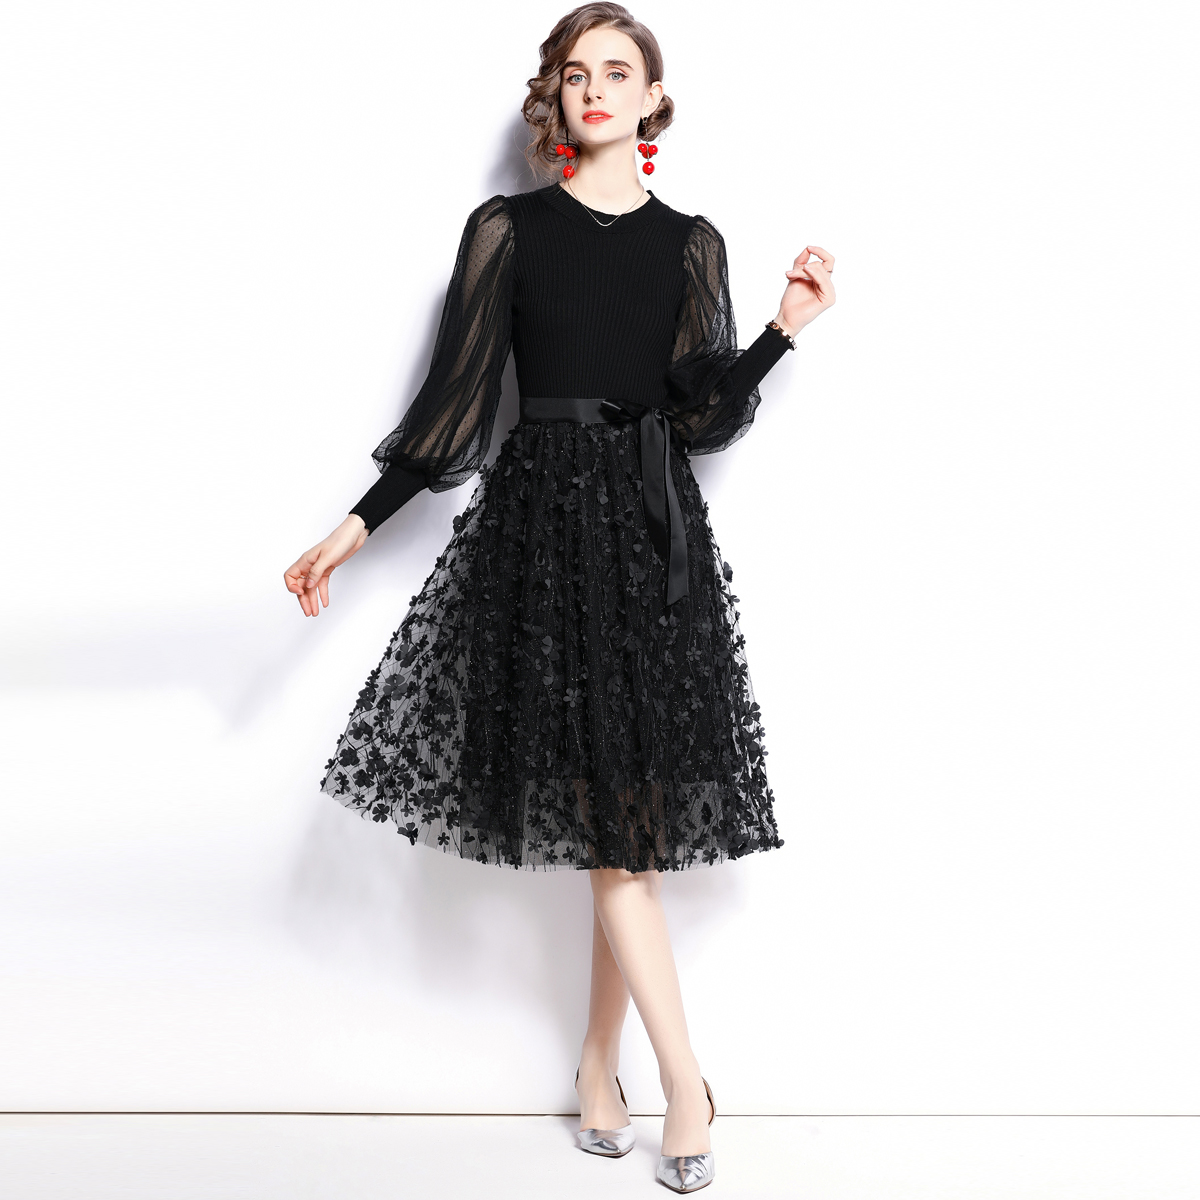 Autumn floral splice fashion knitted dress for women